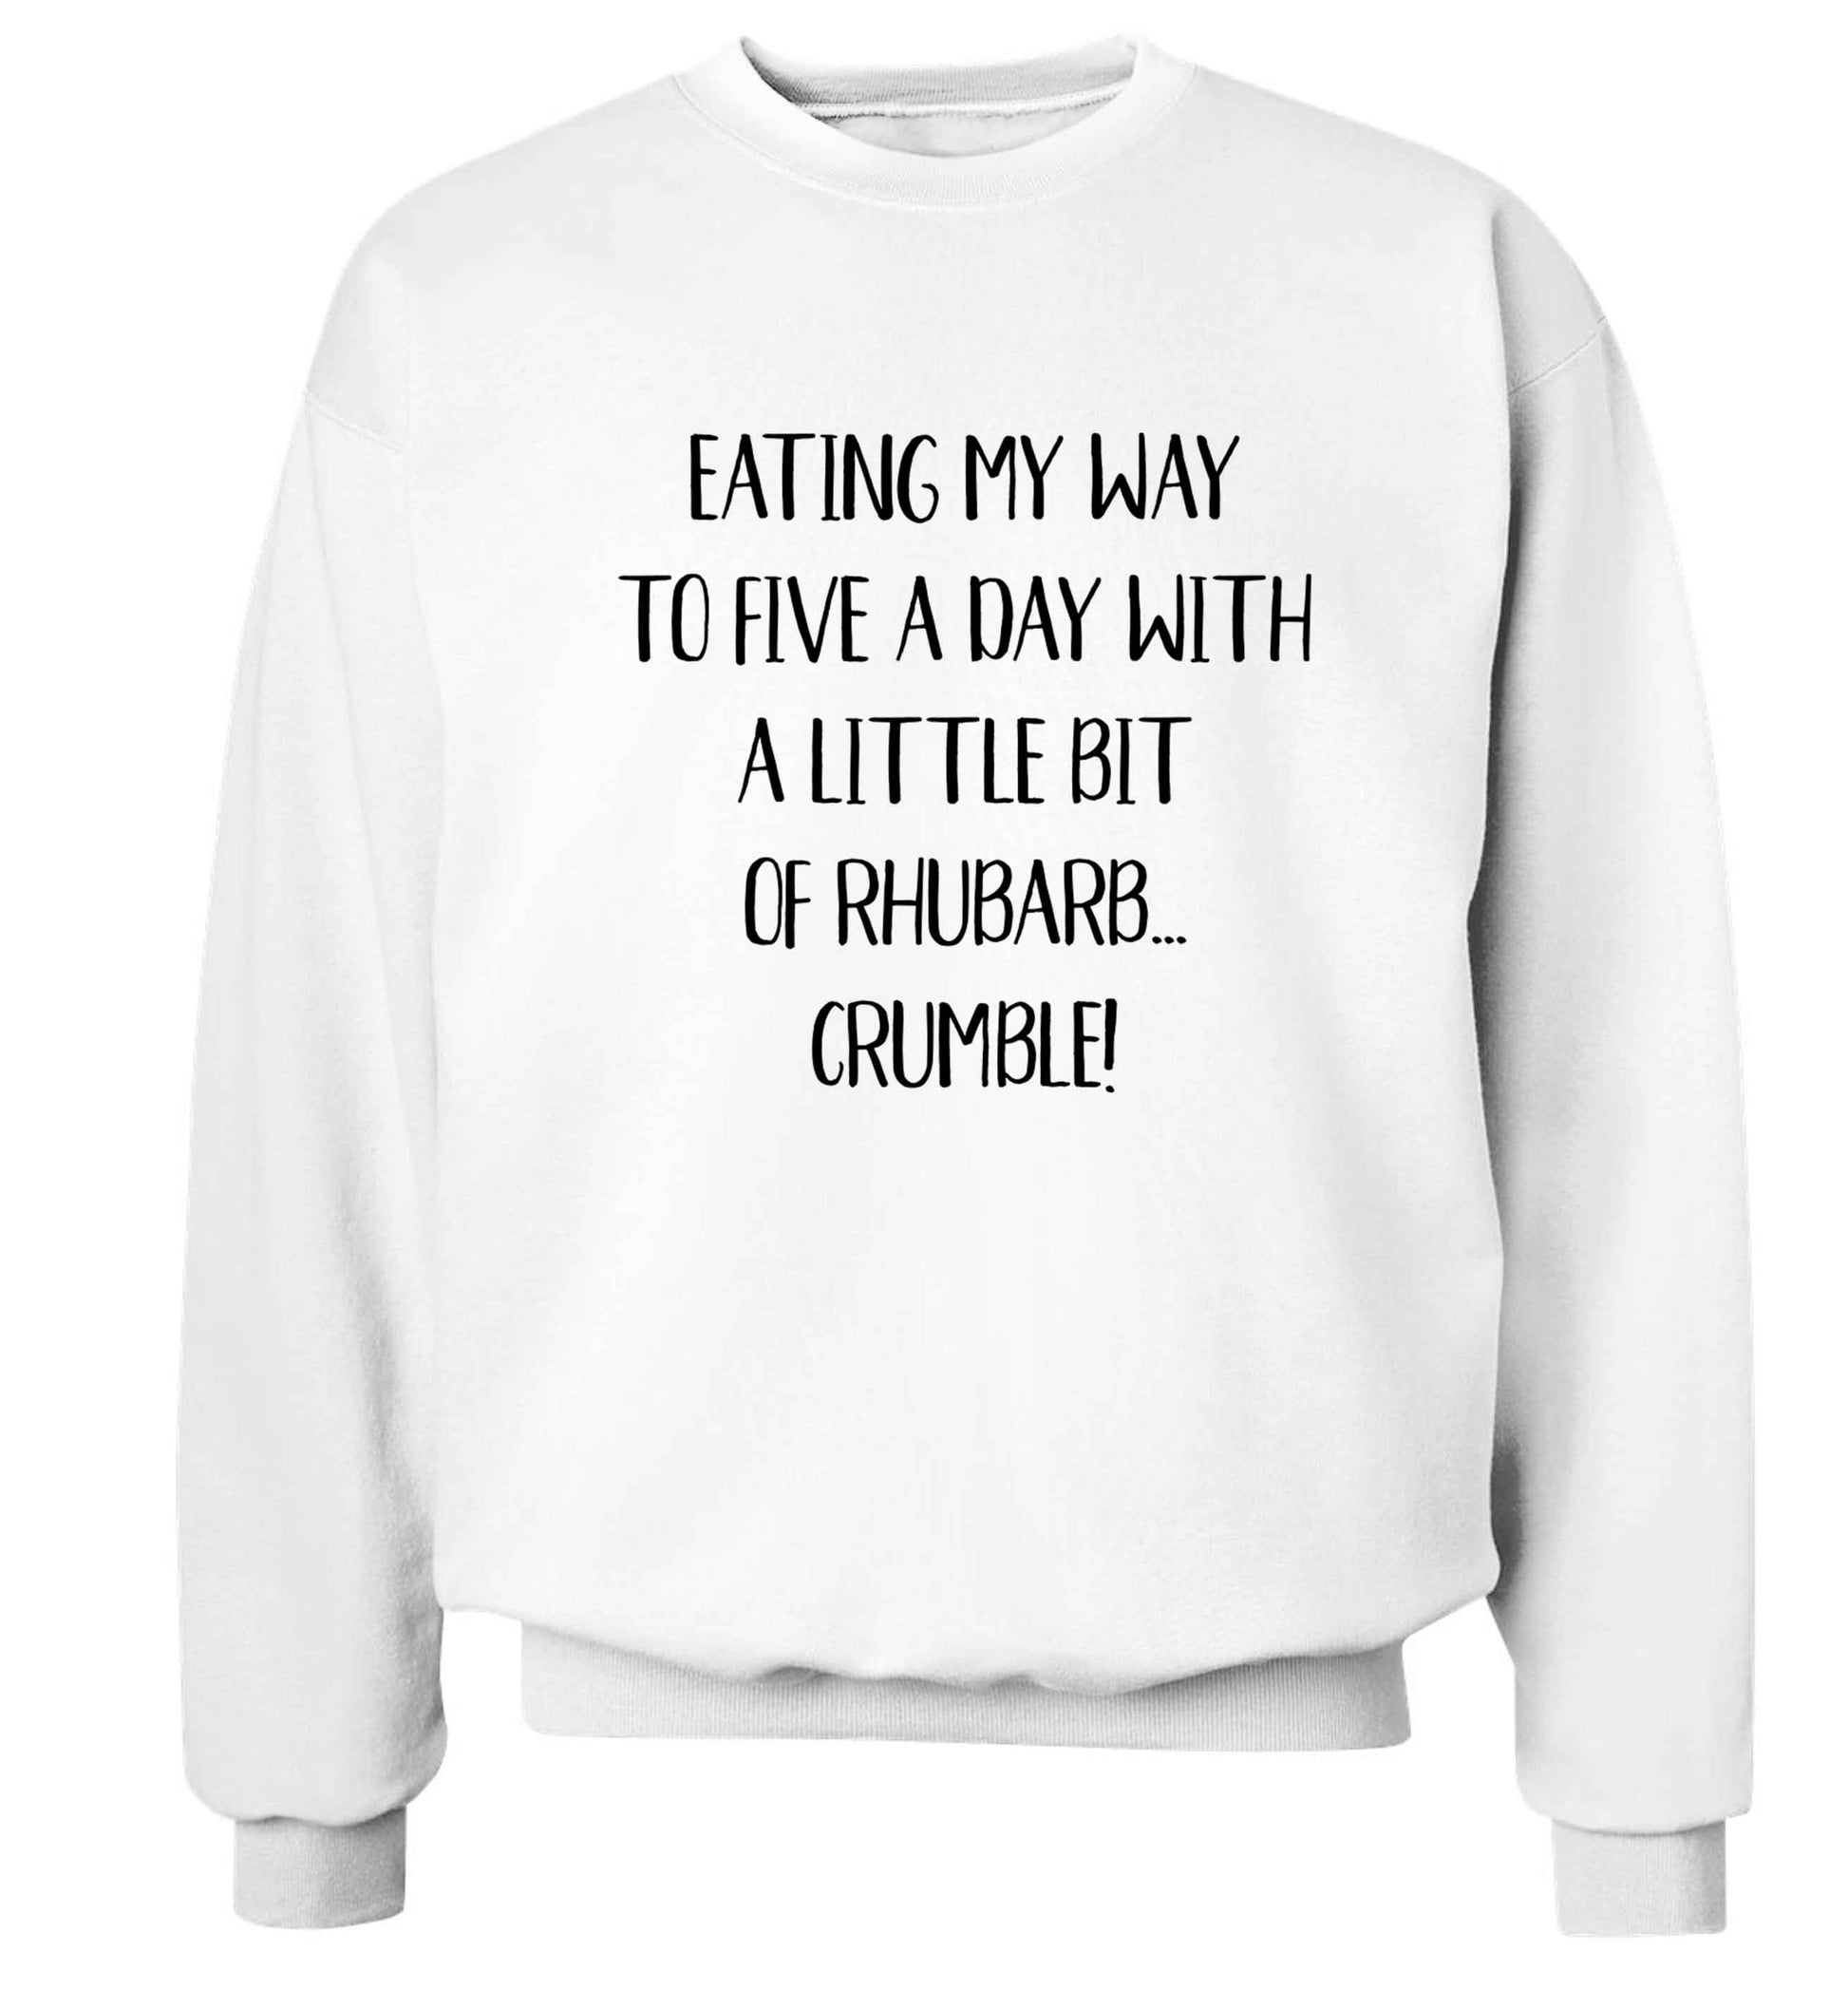 Eating my way to five a day with a little bit of rhubarb crumble Adult's unisex white Sweater 2XL